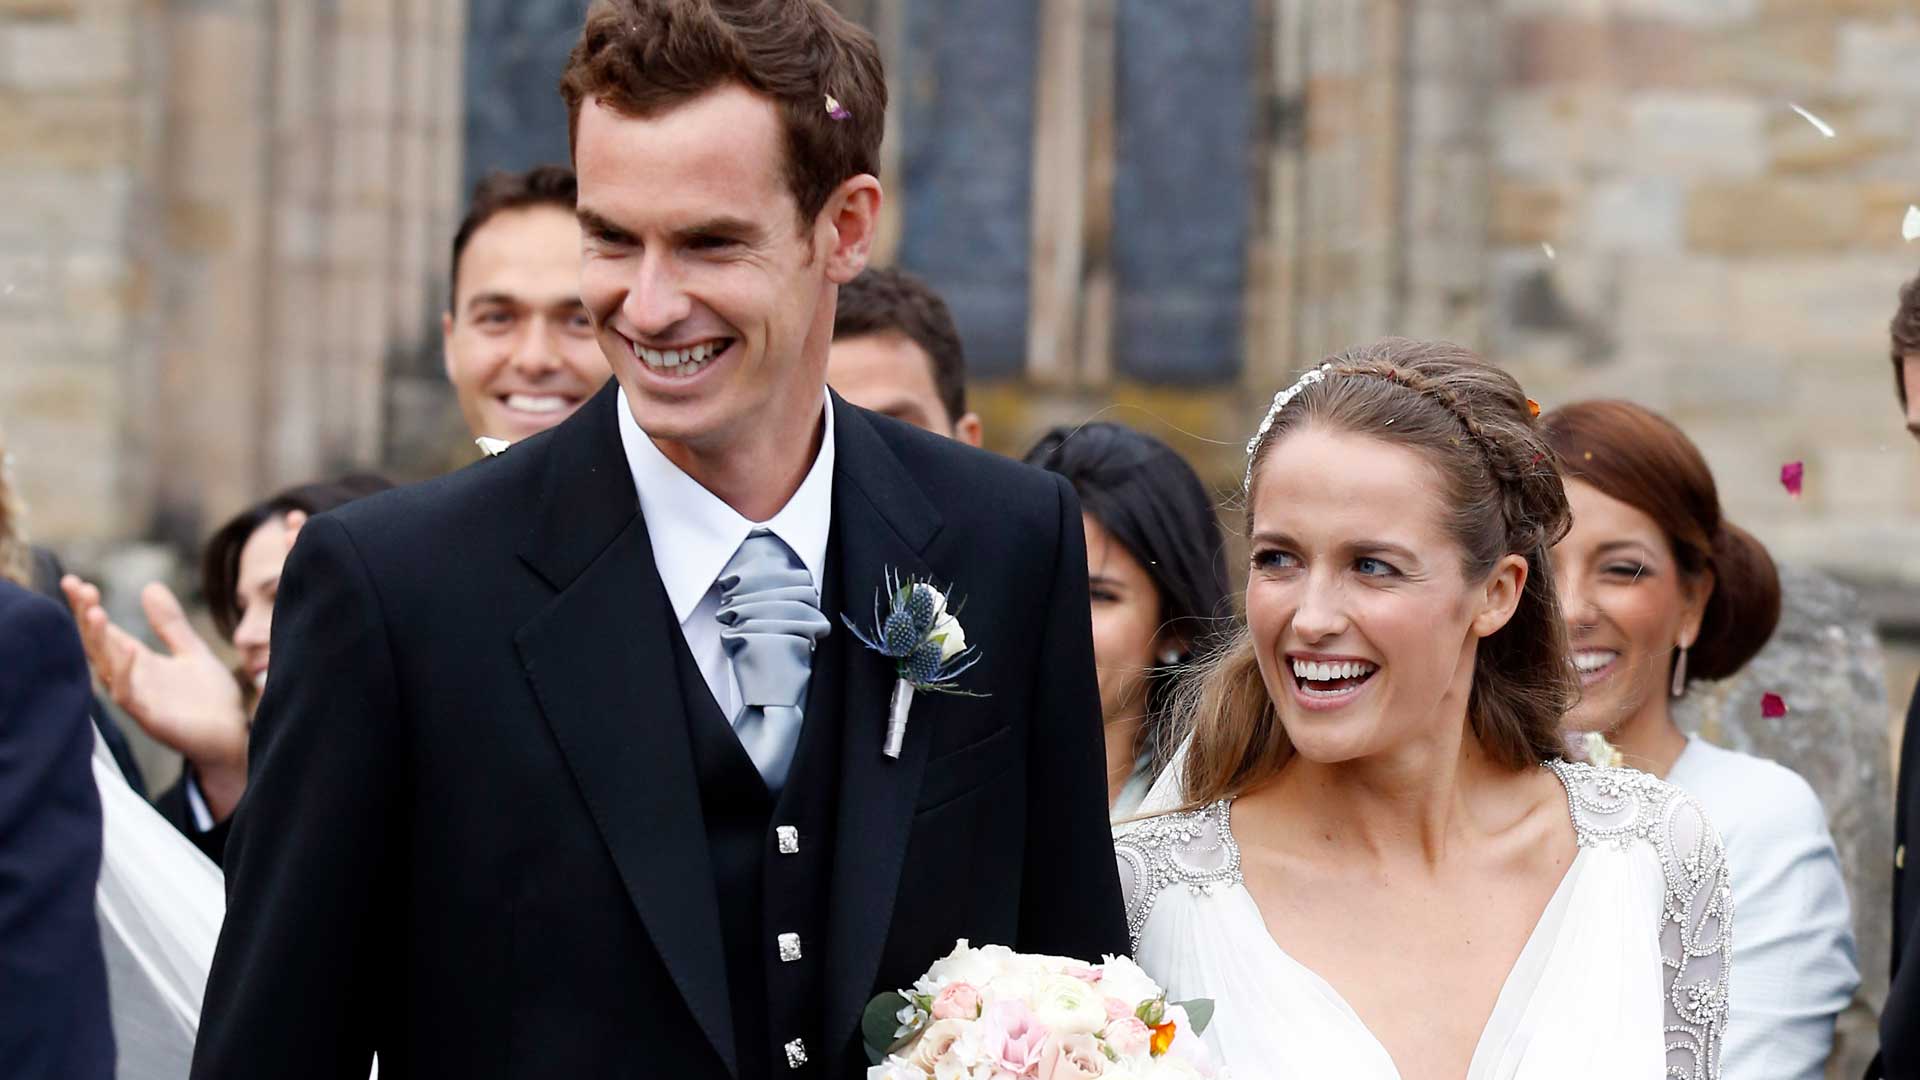 <a href='https://www.atptour.com/en/players/andy-murray/mc10/overview'>Andy Murray</a>, Kim Sears